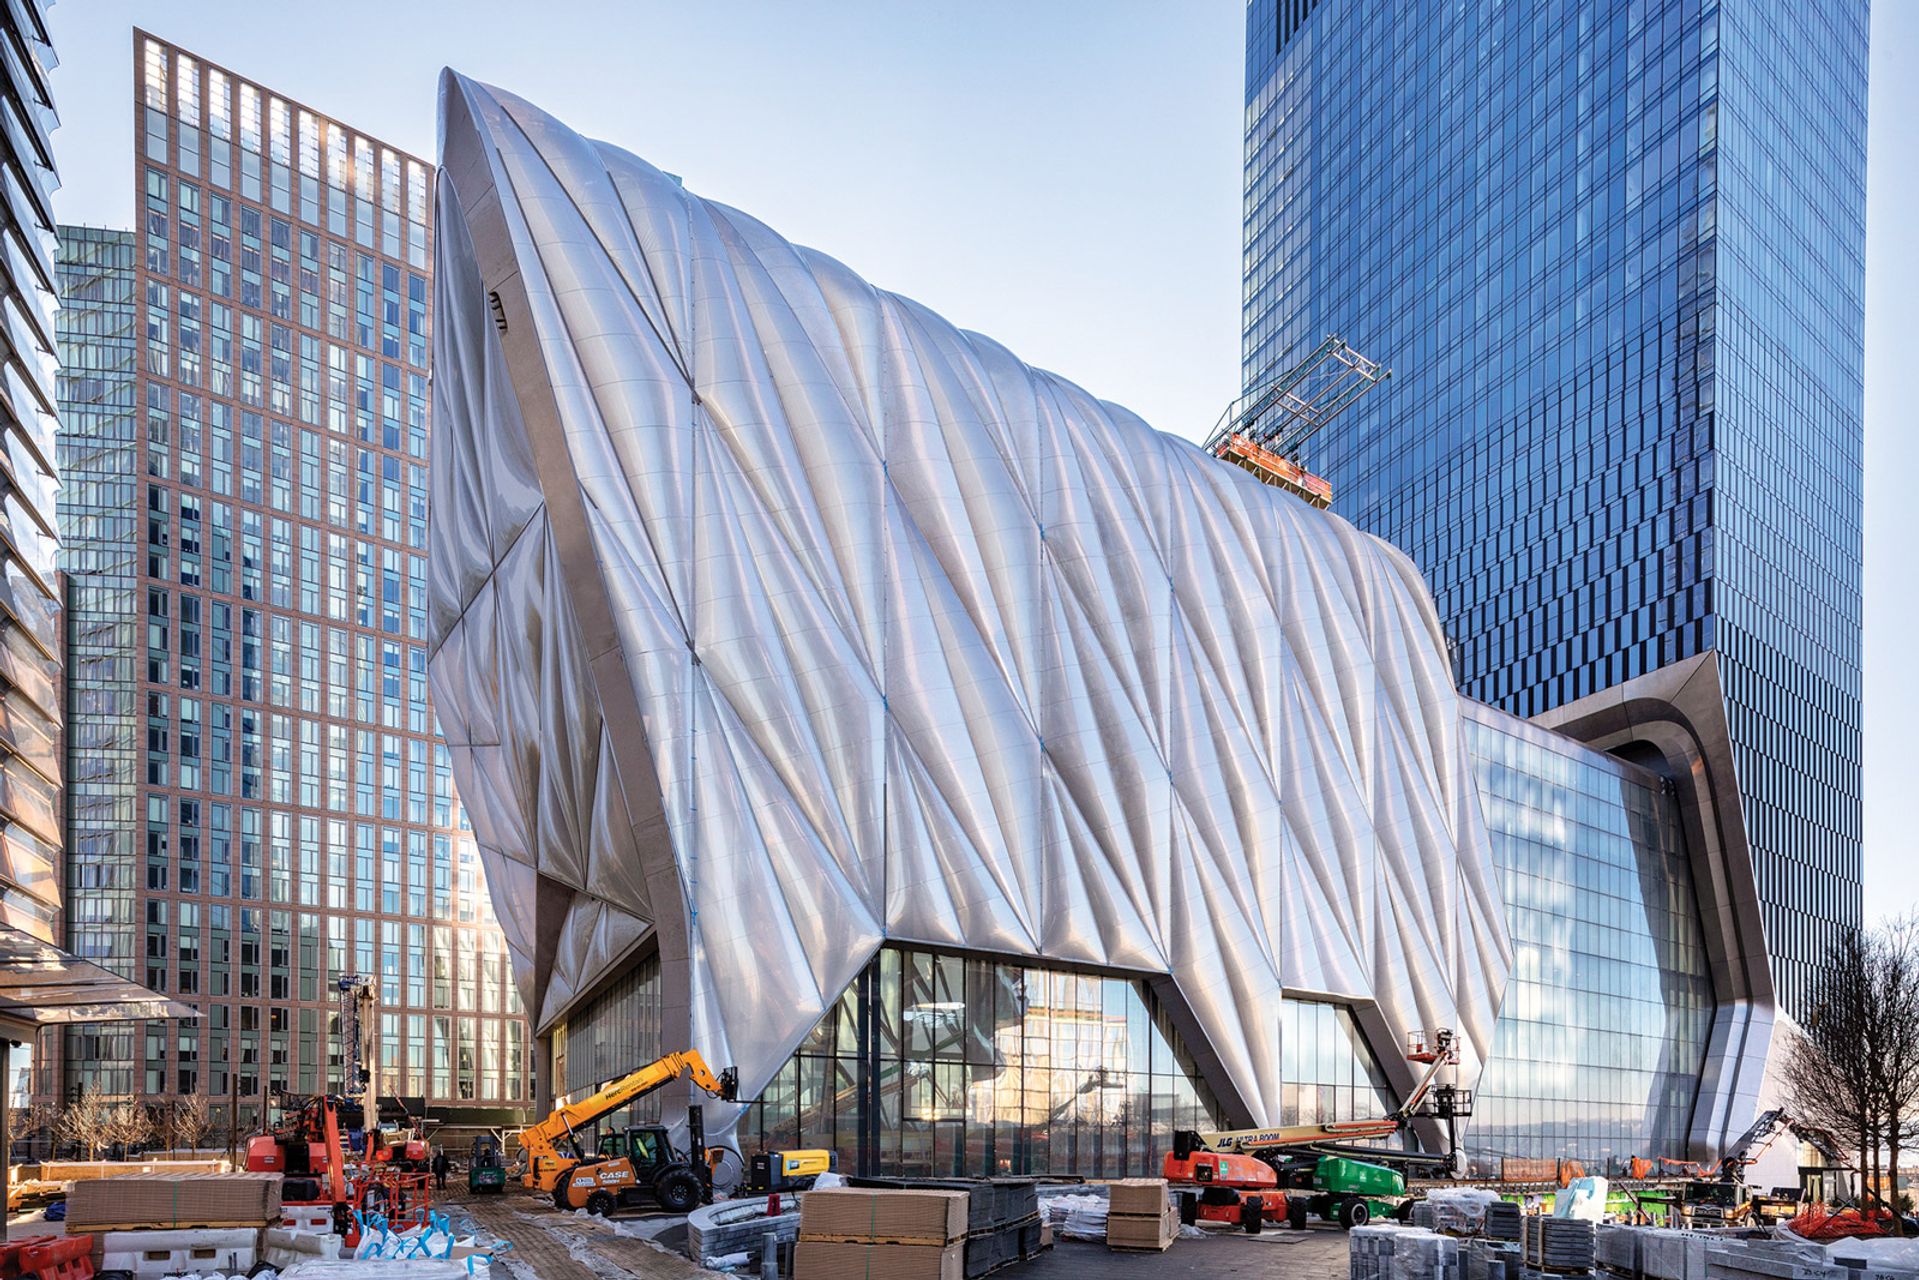 Shapeshifting 475m Arts Space The Shed Opens In New York S Hudson Yards